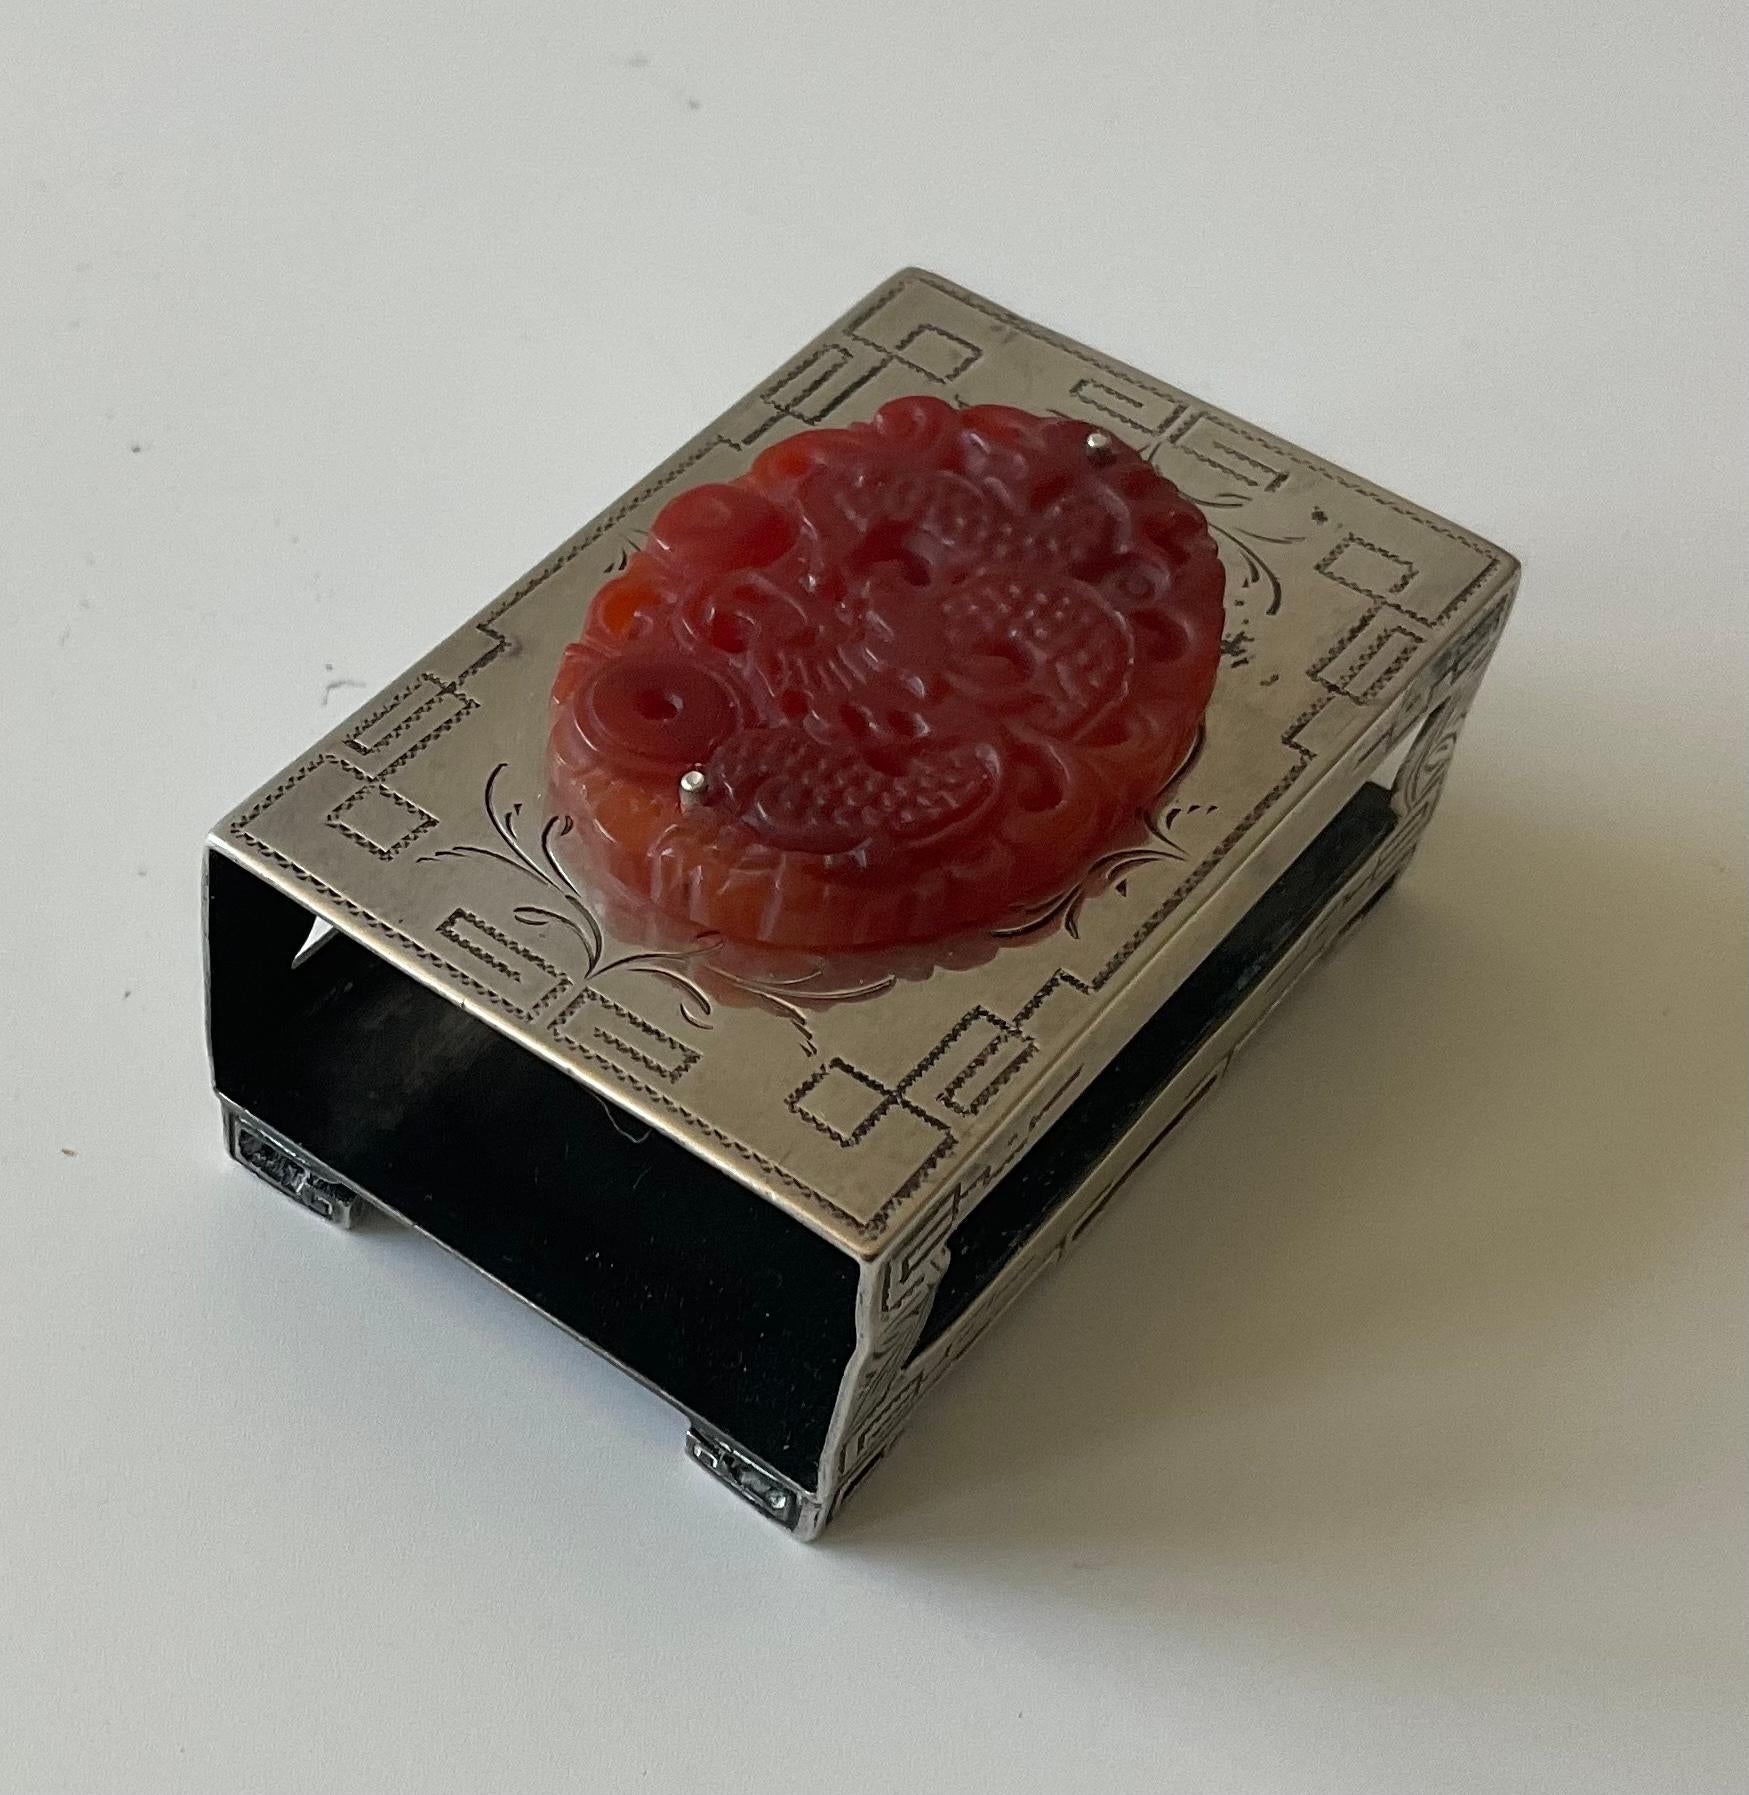 Edward Farmer New York Sterling and dragon carnelian art deco matchbox cover Signed as shown. We believe the original stone to be Carnelian, but are not gemologists. The carving of a dragon in the stone is extremely well done. Sterling detail is